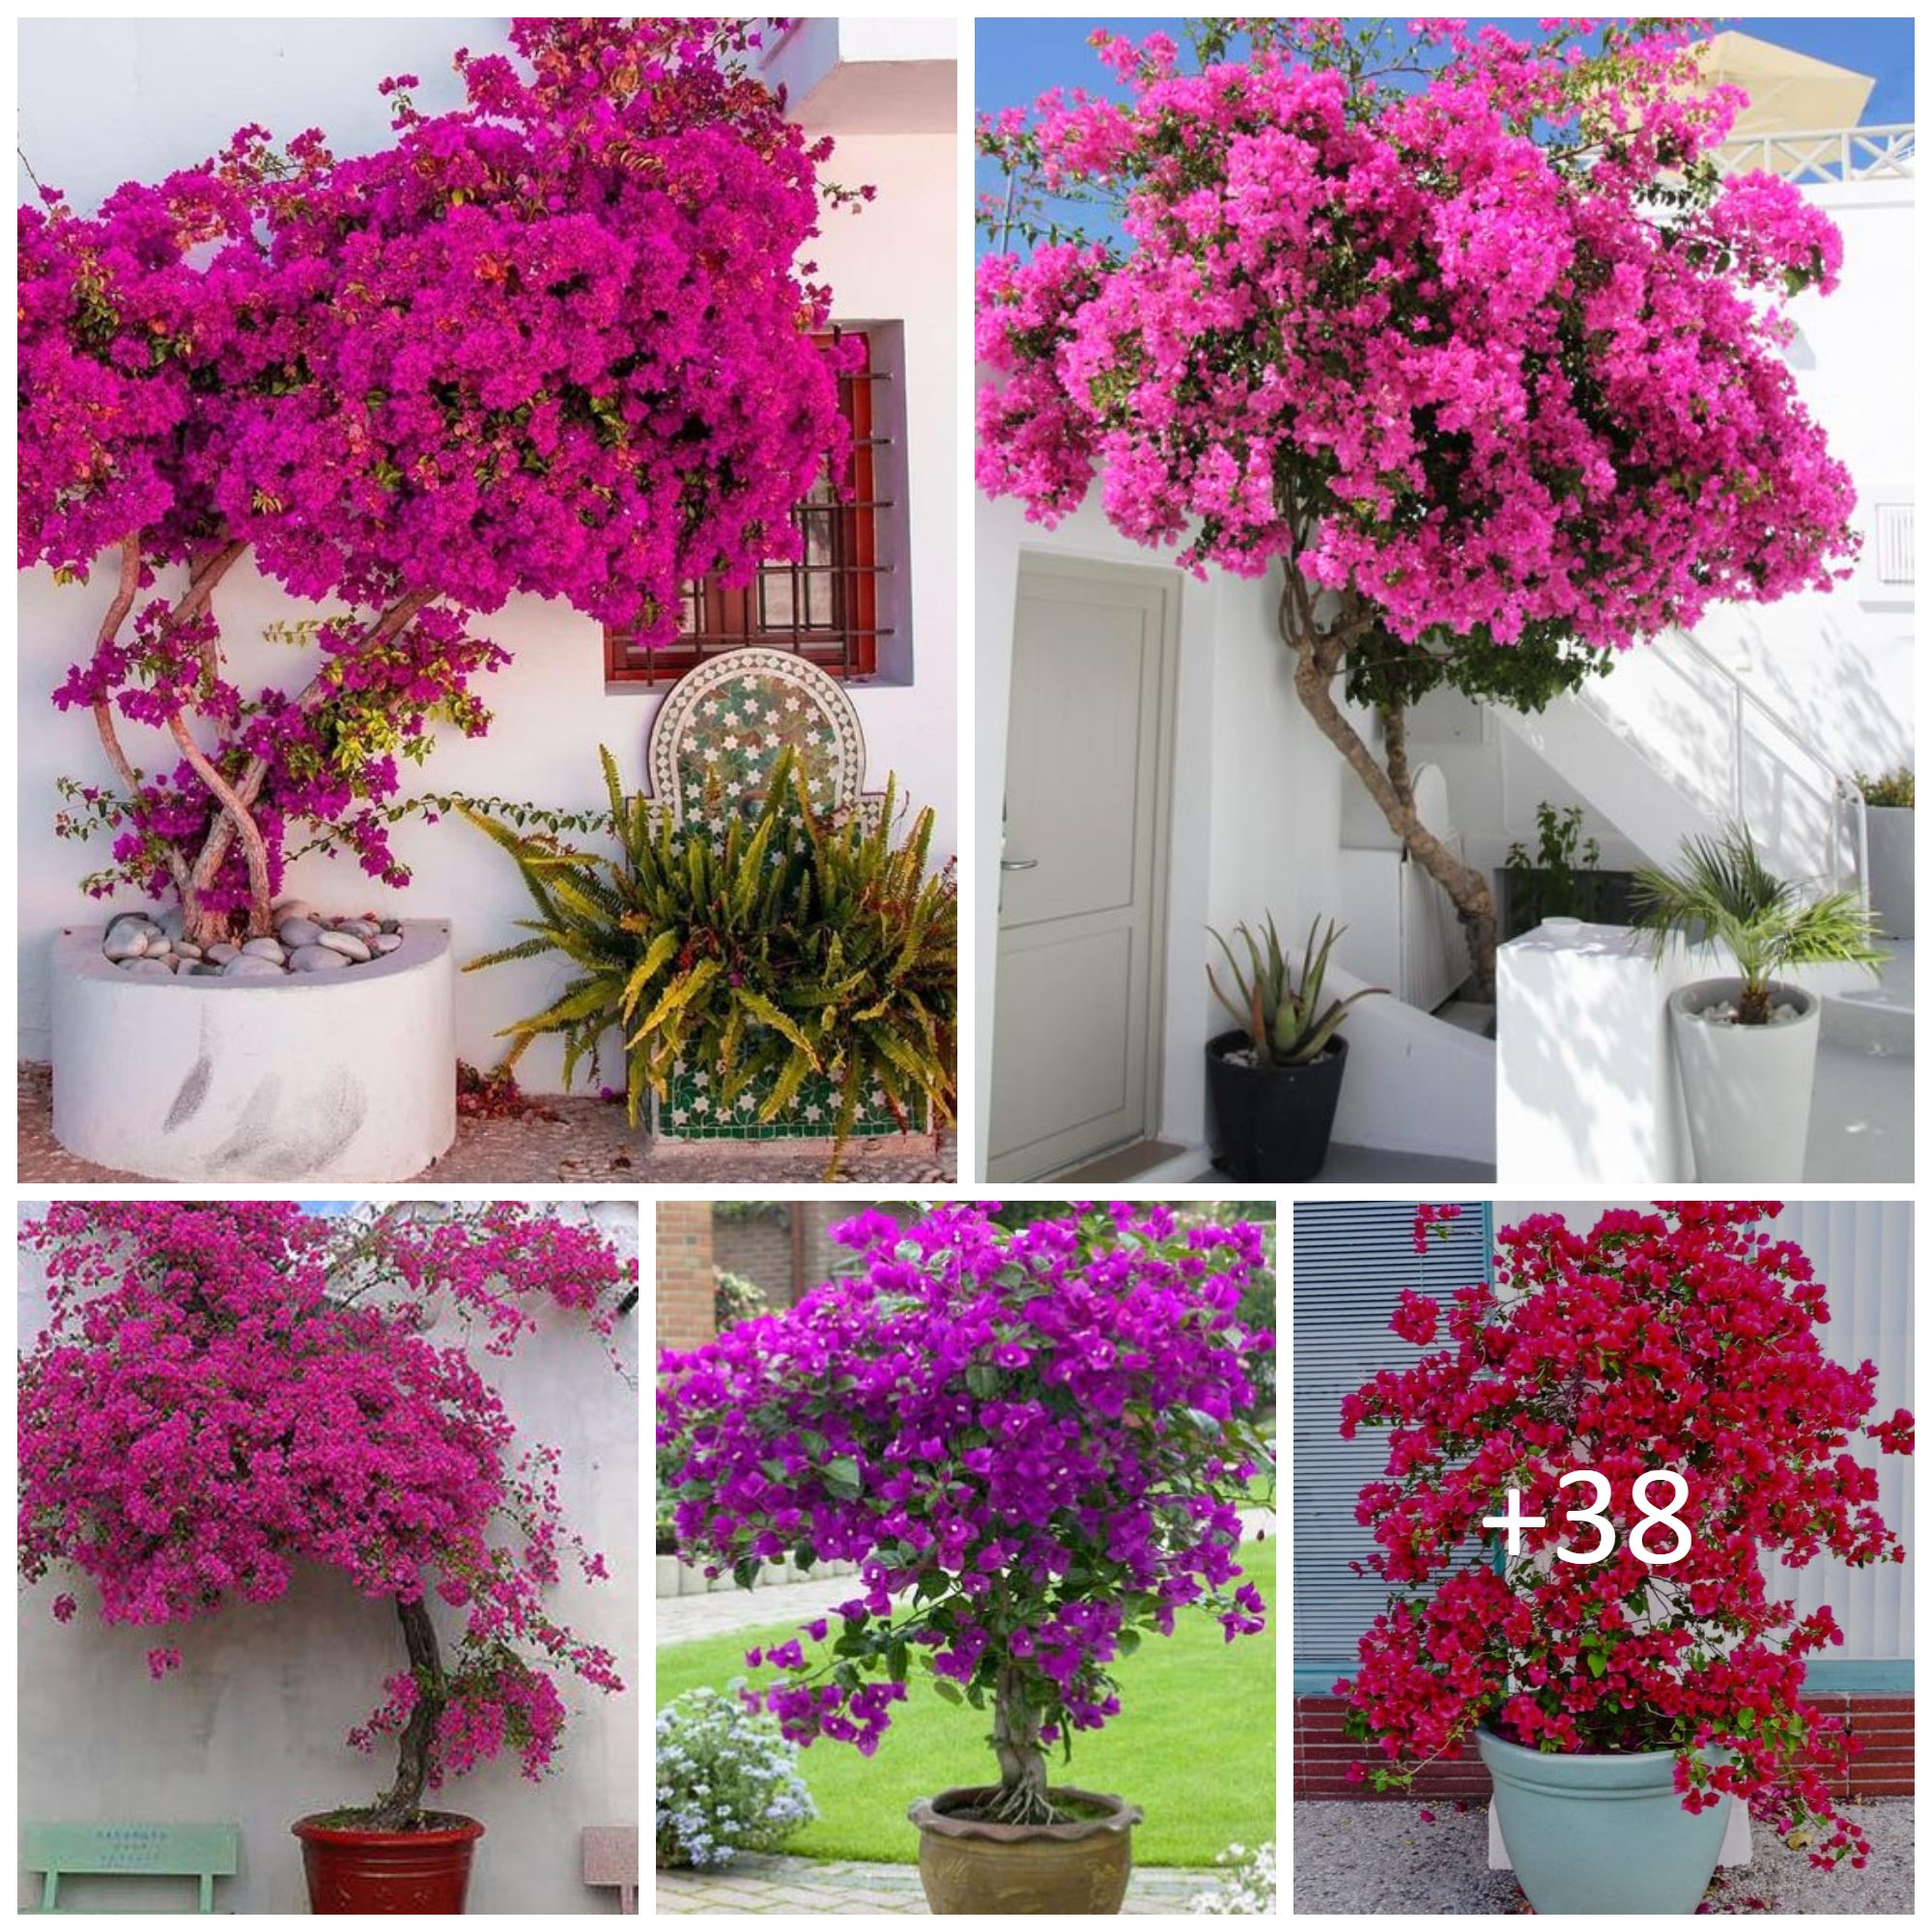 How to Grow and Care for Bougainvillea